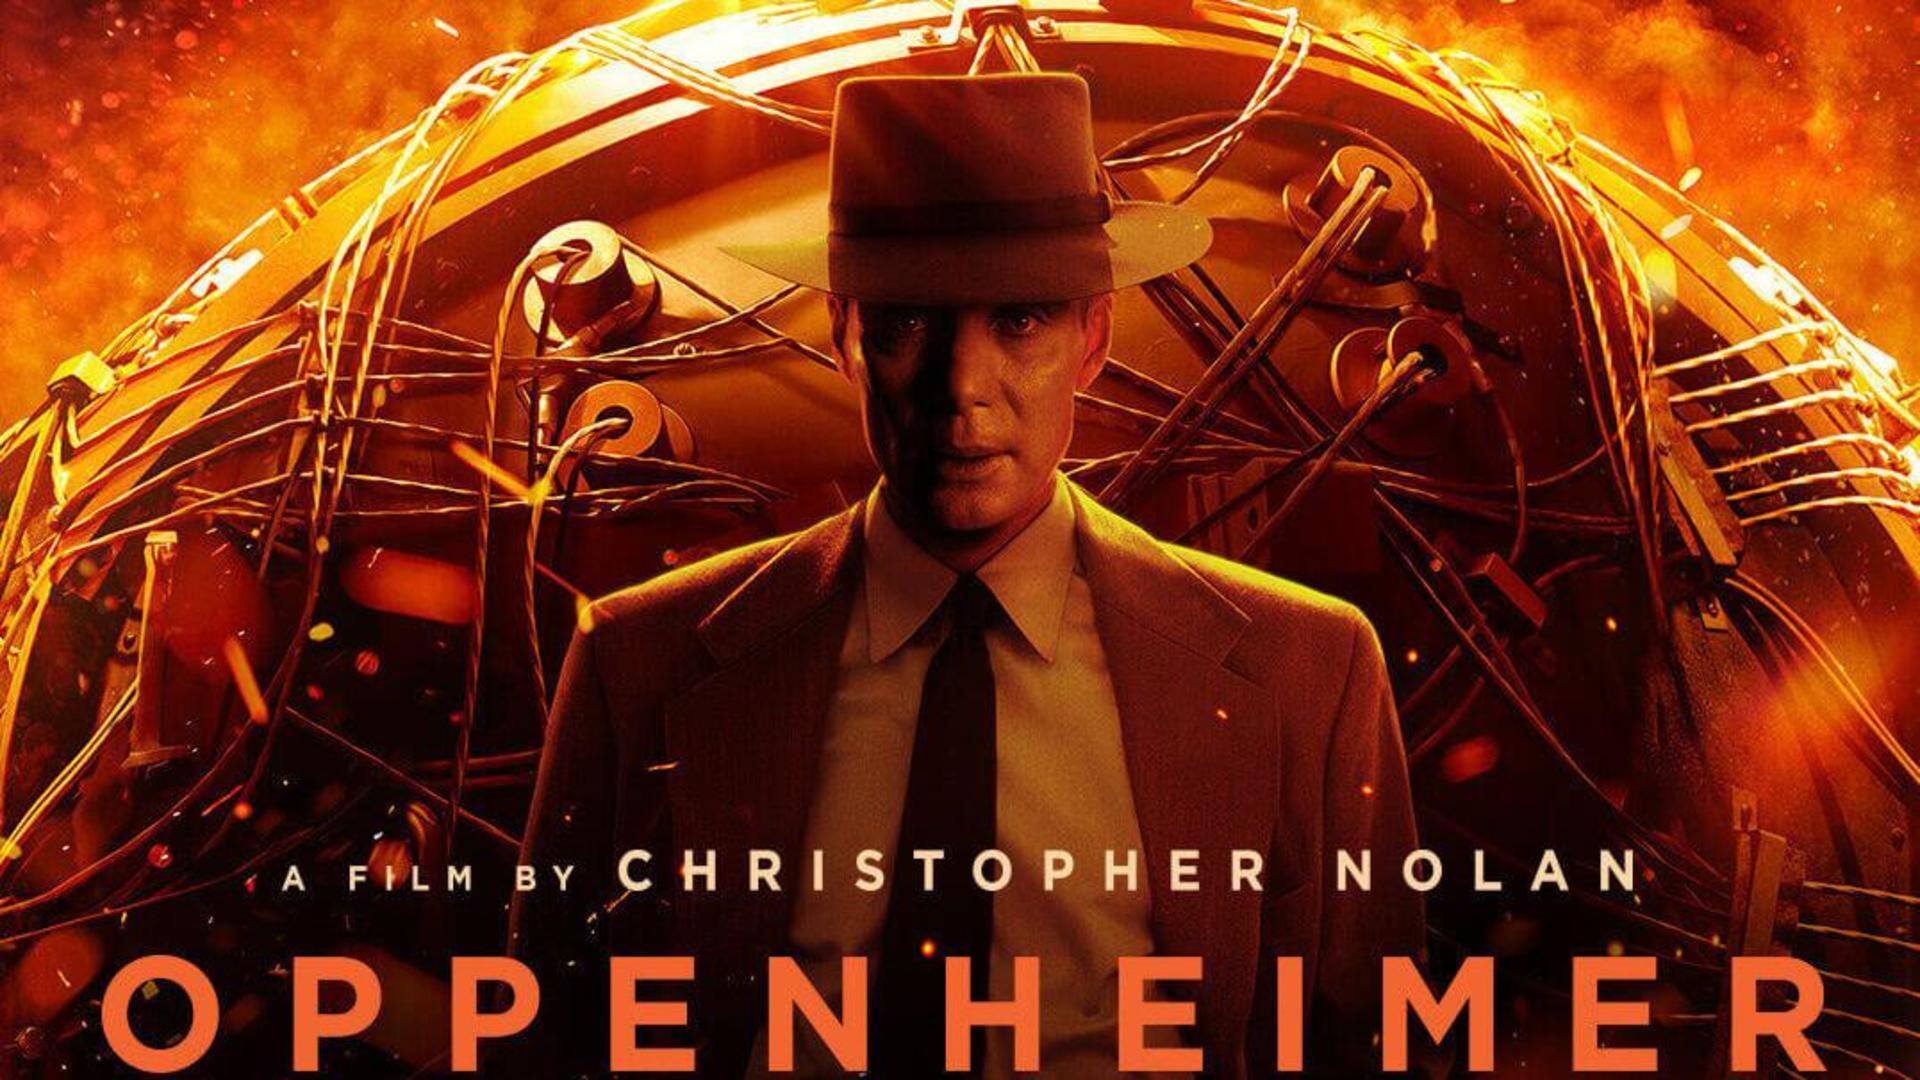 'Oppenheimer' sells over 22,500 tickets in India; advance bookings open